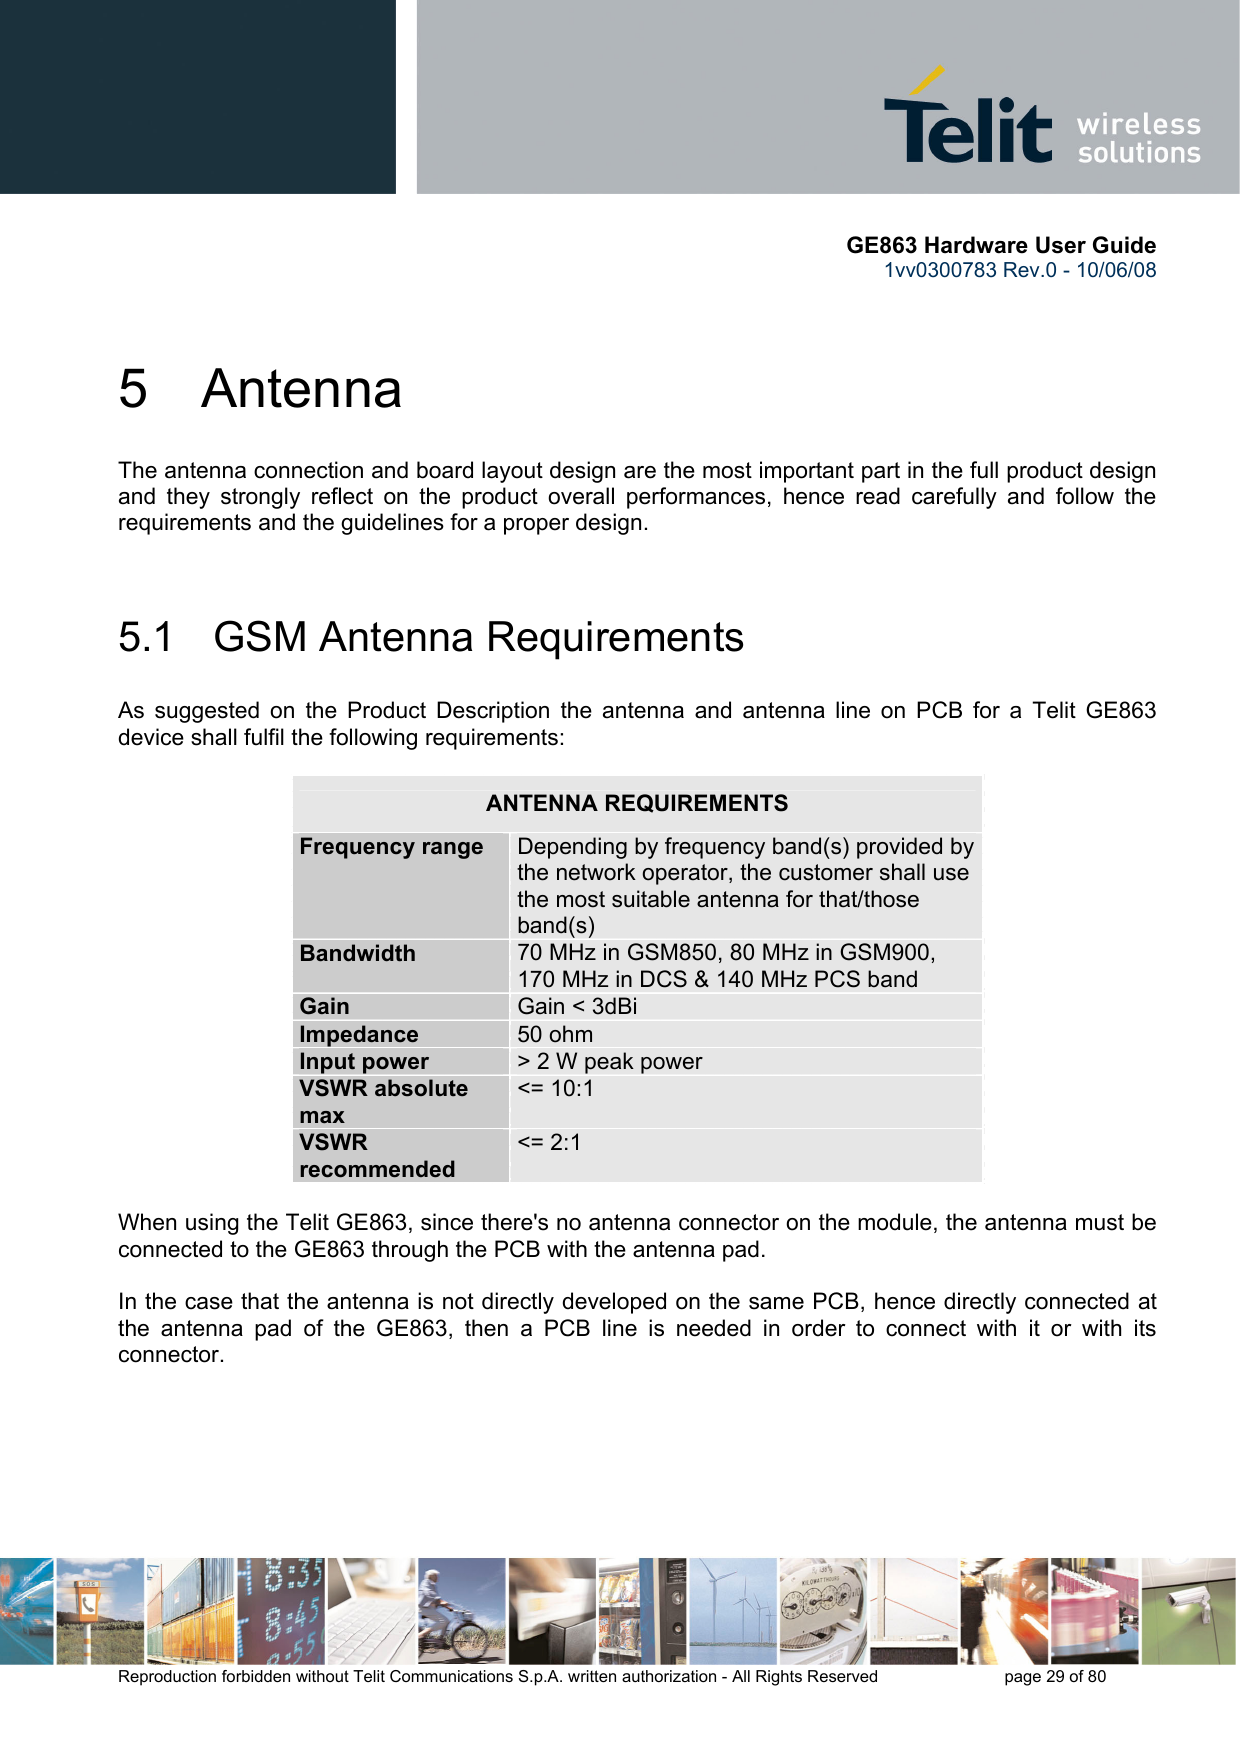       GE863 Hardware User Guide 1vv0300783 Rev.0 - 10/06/08 Reproduction forbidden without Telit Communications S.p.A. written authorization - All Rights Reserved    page 29 of 80  5 Antenna The antenna connection and board layout design are the most important part in the full product design and they strongly reflect on the product overall performances, hence read carefully and follow the requirements and the guidelines for a proper design.  5.1   GSM Antenna Requirements As suggested on the Product Description the antenna and antenna line on PCB for a Telit GE863 device shall fulfil the following requirements:  ANTENNA REQUIREMENTS Frequency range  Depending by frequency band(s) provided by the network operator, the customer shall use the most suitable antenna for that/those band(s) Bandwidth  70 MHz in GSM850, 80 MHz in GSM900, 170 MHz in DCS &amp; 140 MHz PCS band Gain  Gain &lt; 3dBi Impedance  50 ohm Input power  &gt; 2 W peak power VSWR absolute max &lt;= 10:1 VSWR recommended &lt;= 2:1  When using the Telit GE863, since there&apos;s no antenna connector on the module, the antenna must be connected to the GE863 through the PCB with the antenna pad.  In the case that the antenna is not directly developed on the same PCB, hence directly connected at the antenna pad of the GE863, then a PCB line is needed in order to connect with it or with its connector.       